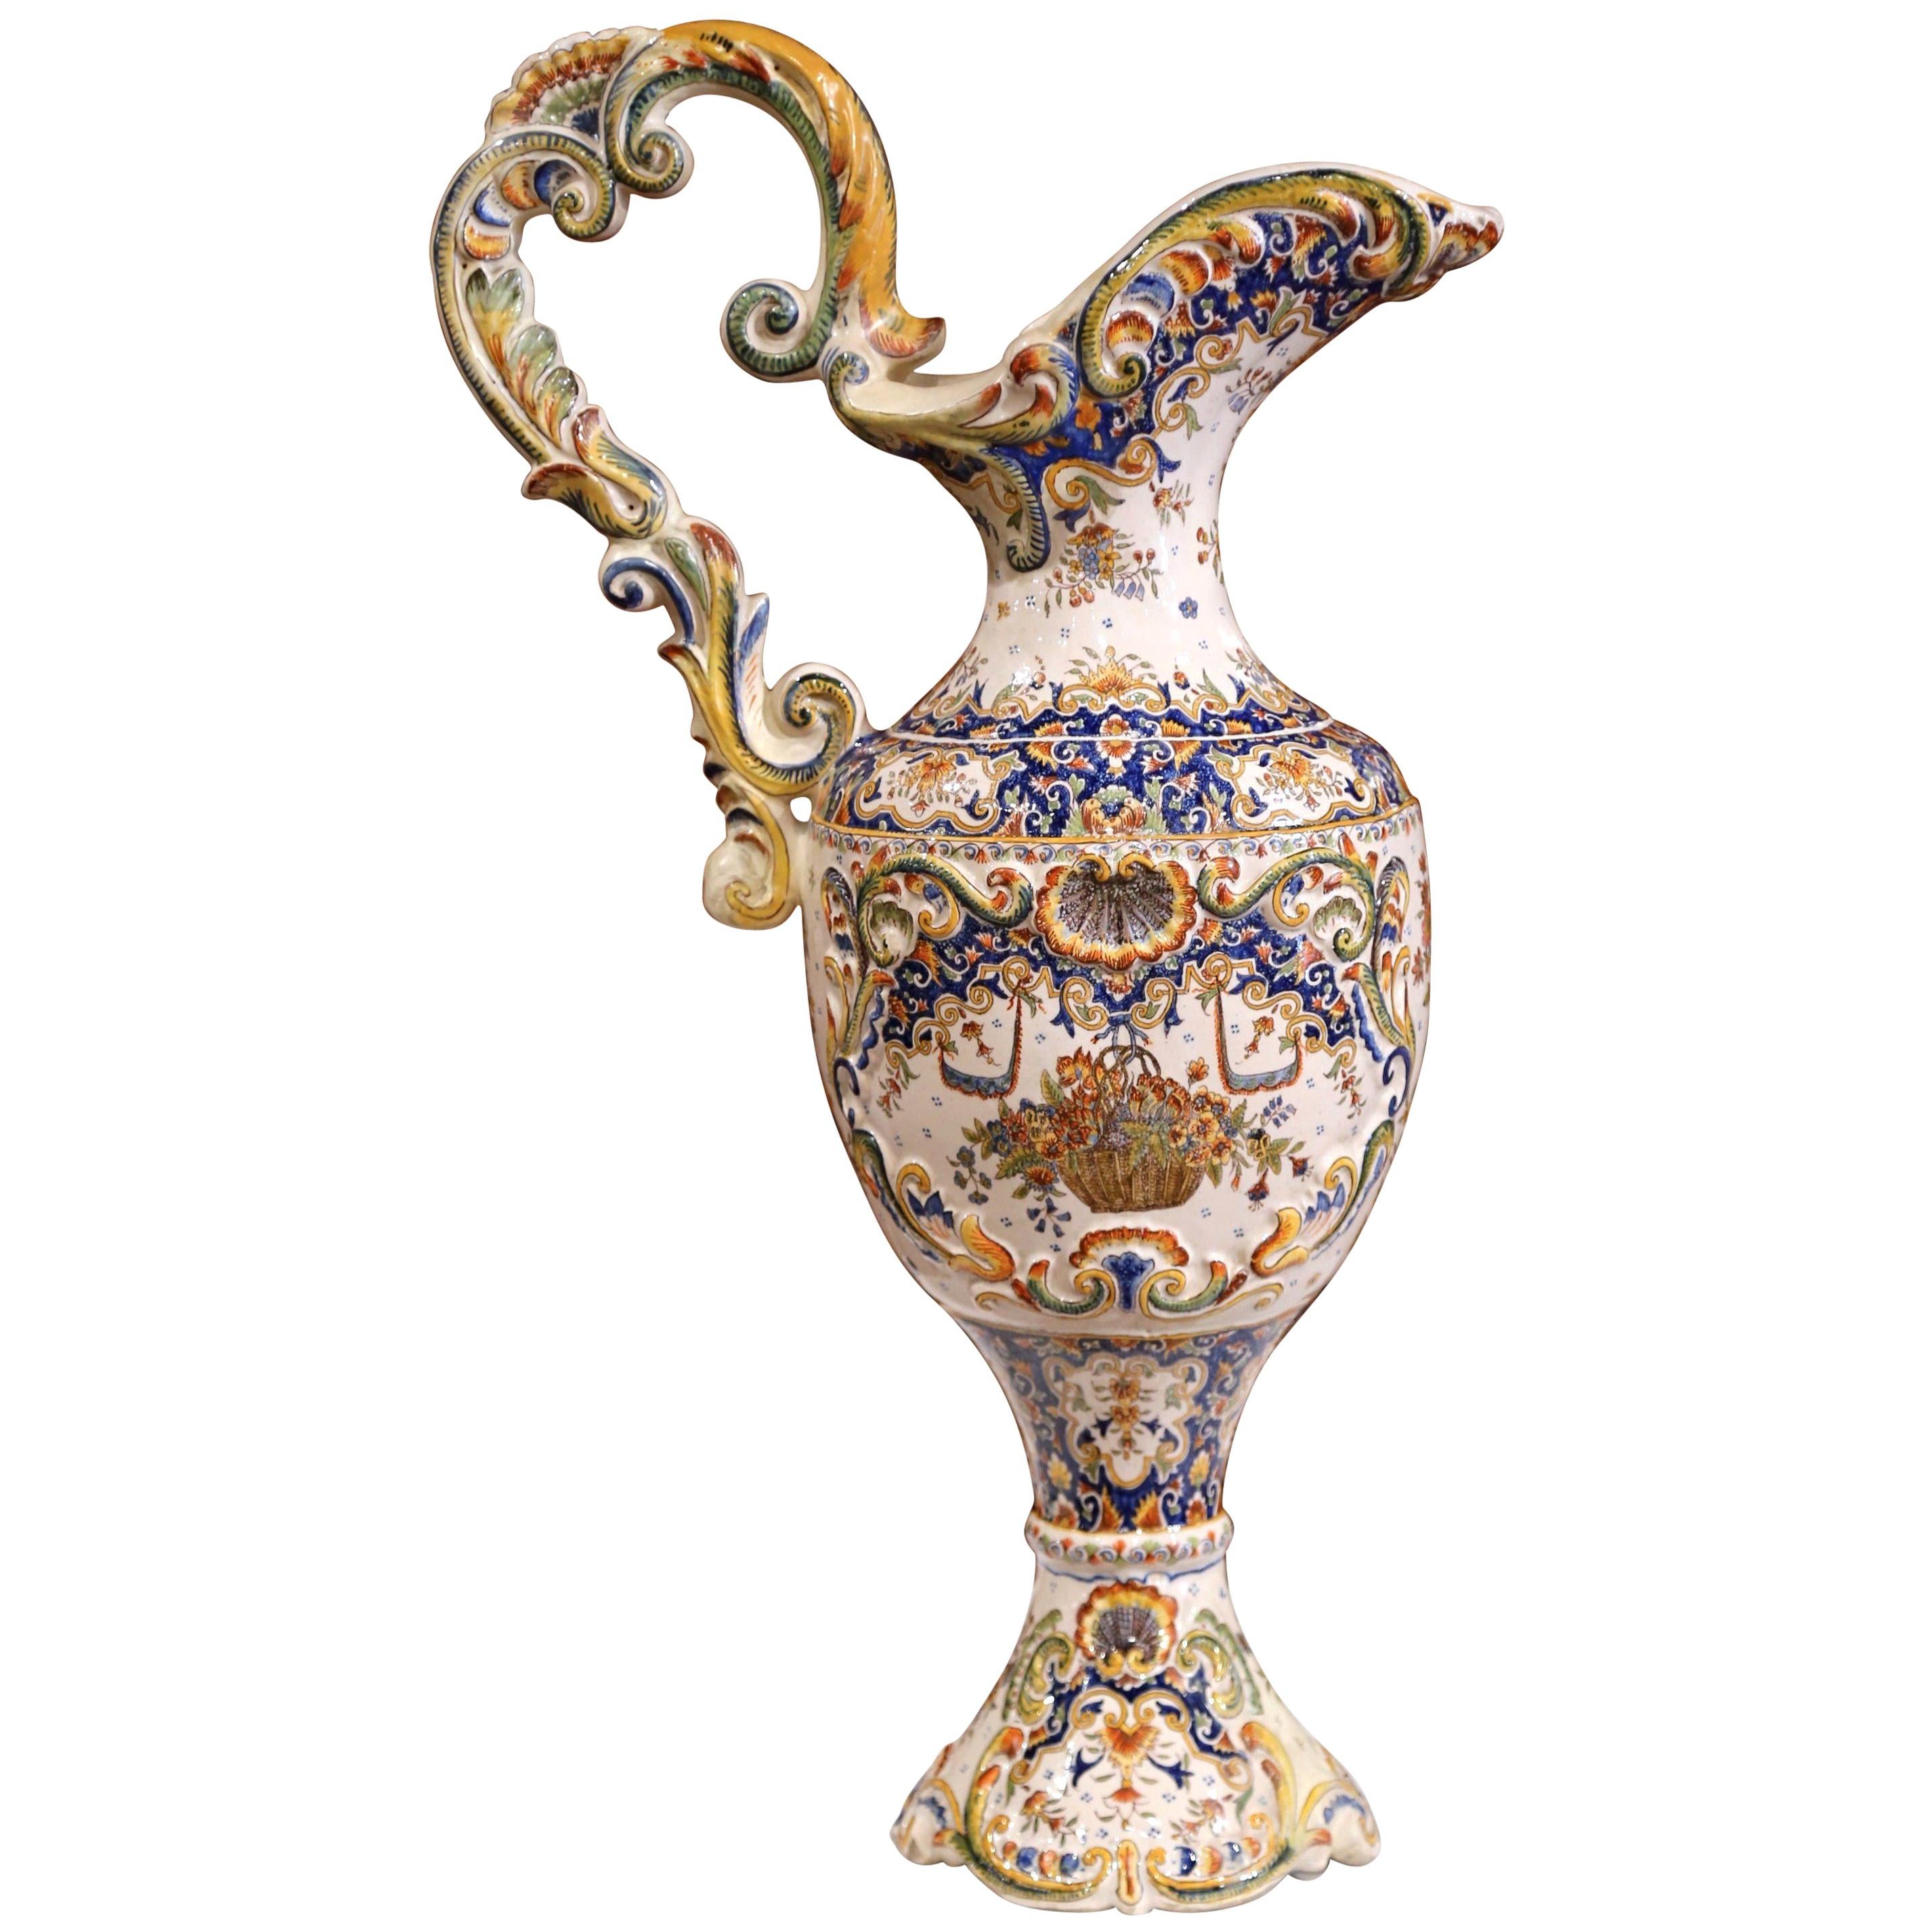 19th Century French Hand Painted Faience Ewer Vase from Normandy